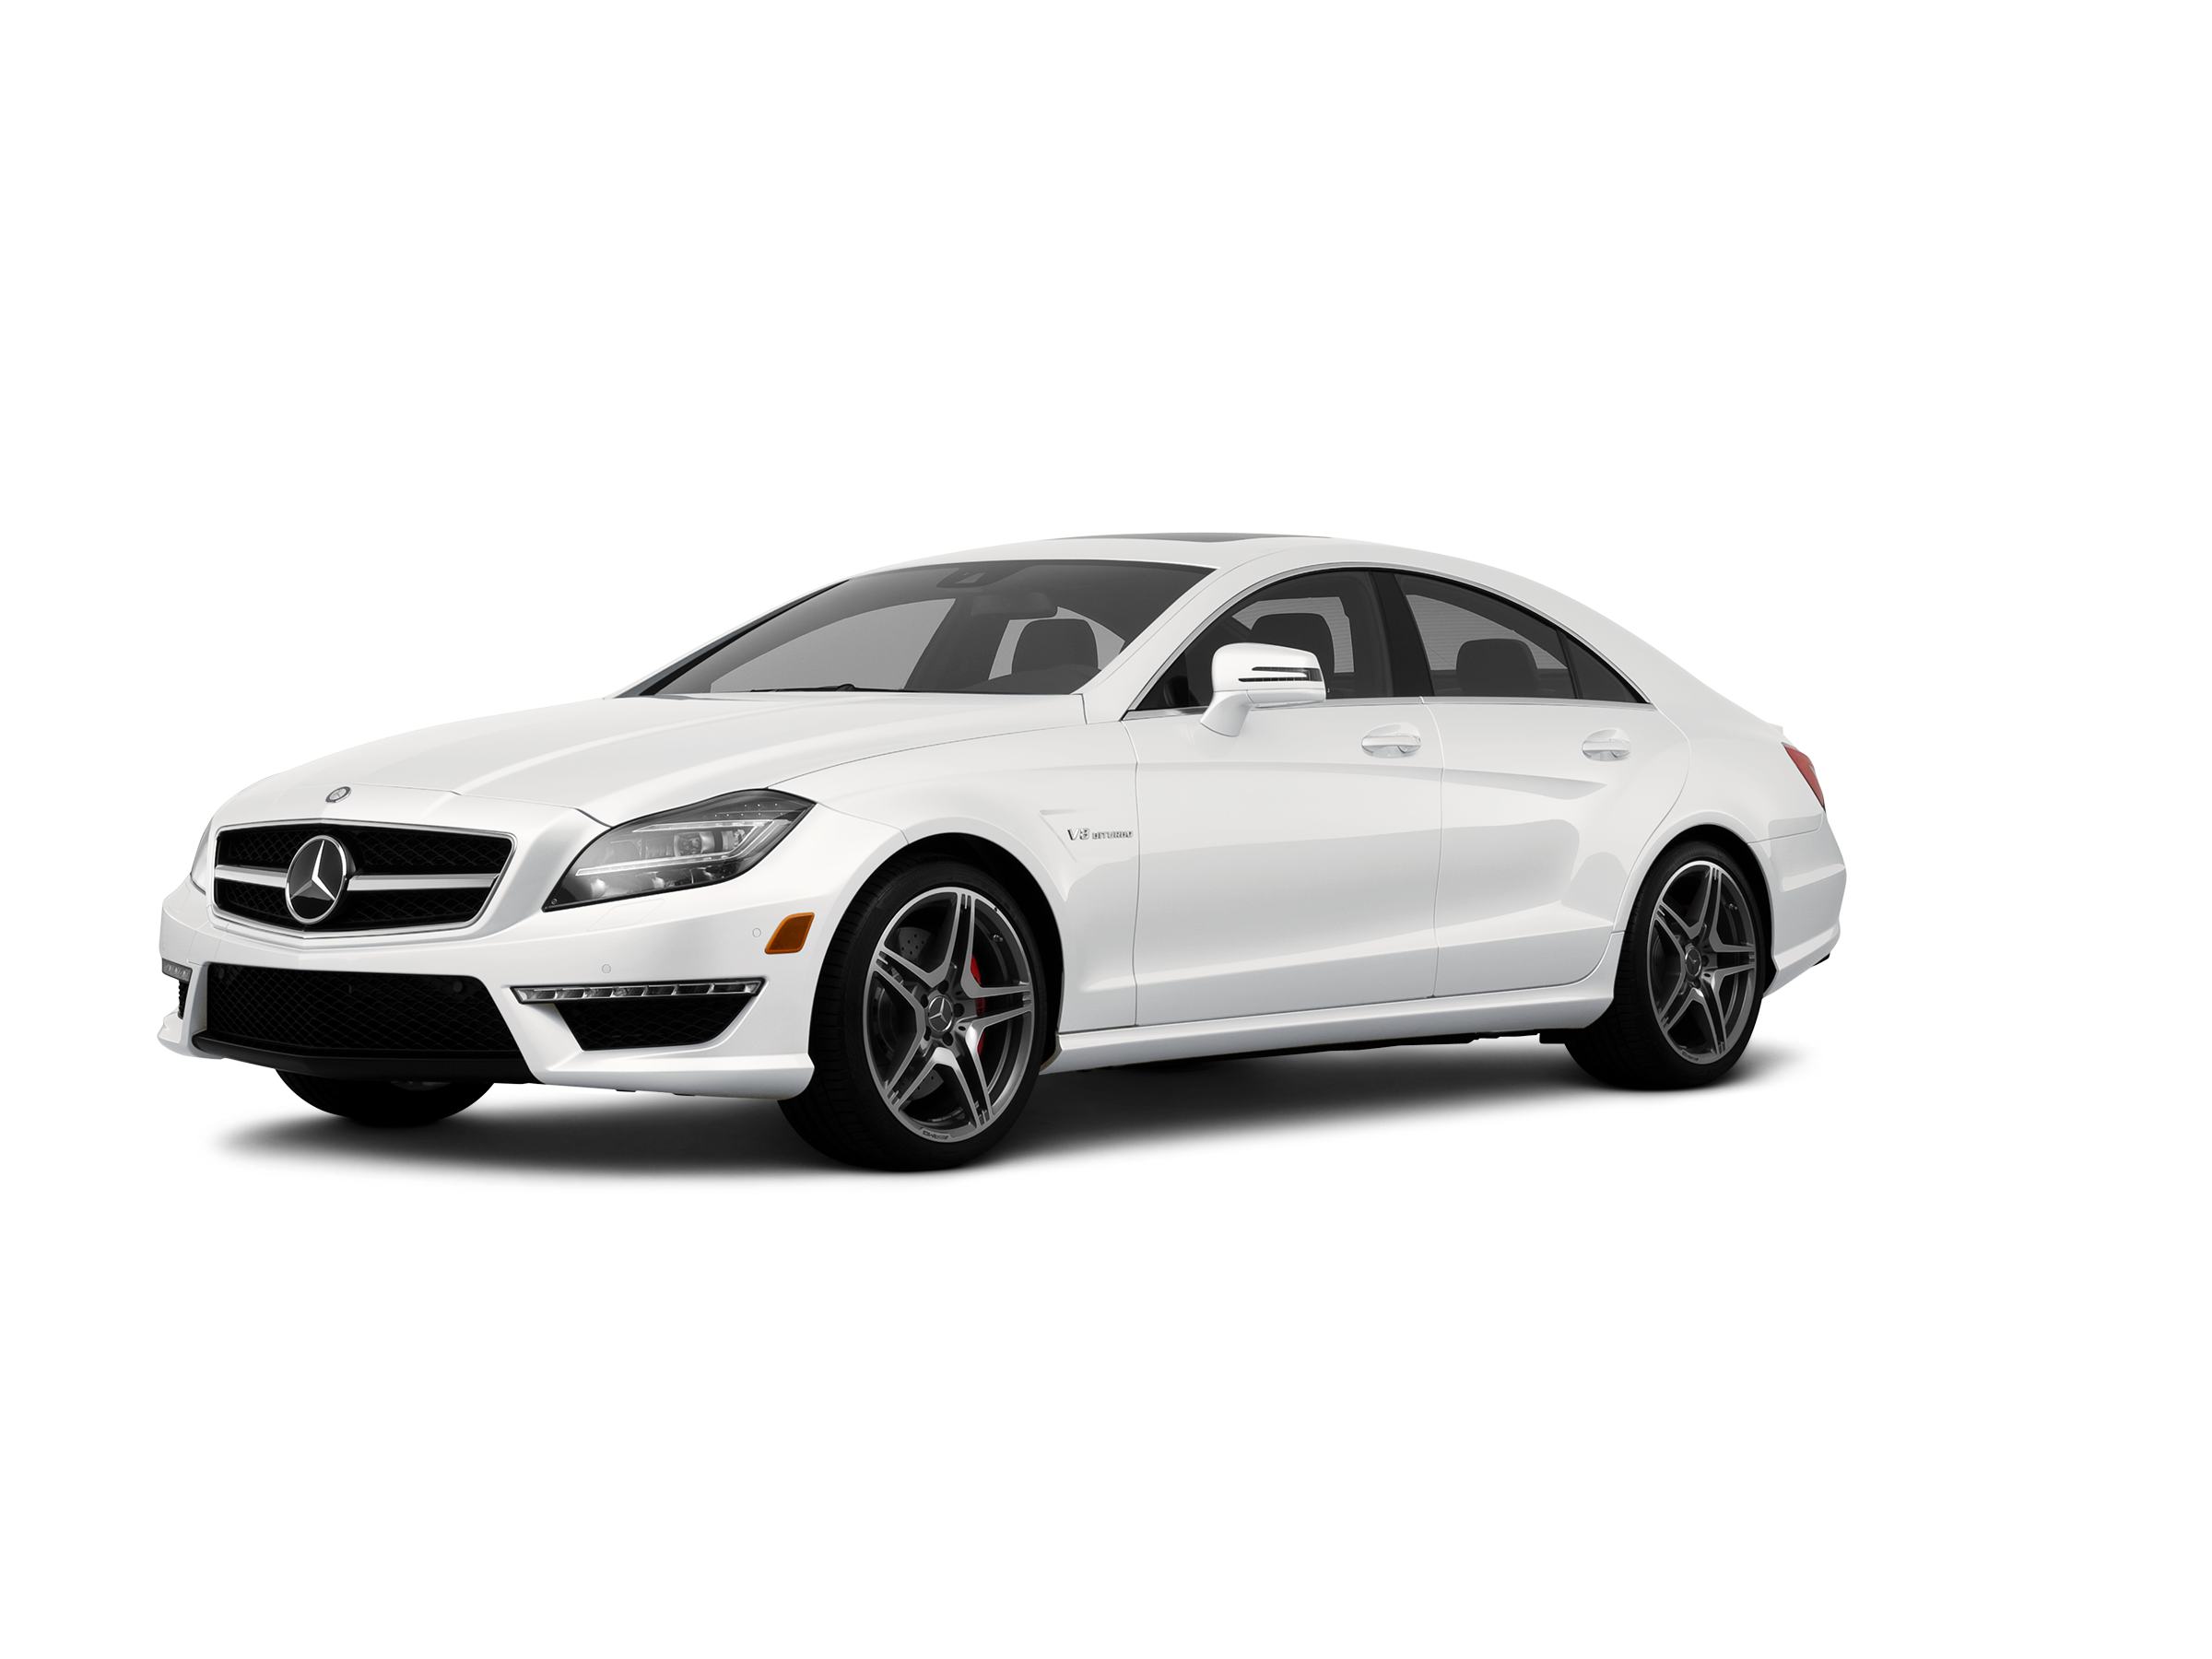 Credo Apto padre 2013 Mercedes-Benz CLS-Class Values & Cars for Sale | Kelley Blue Book